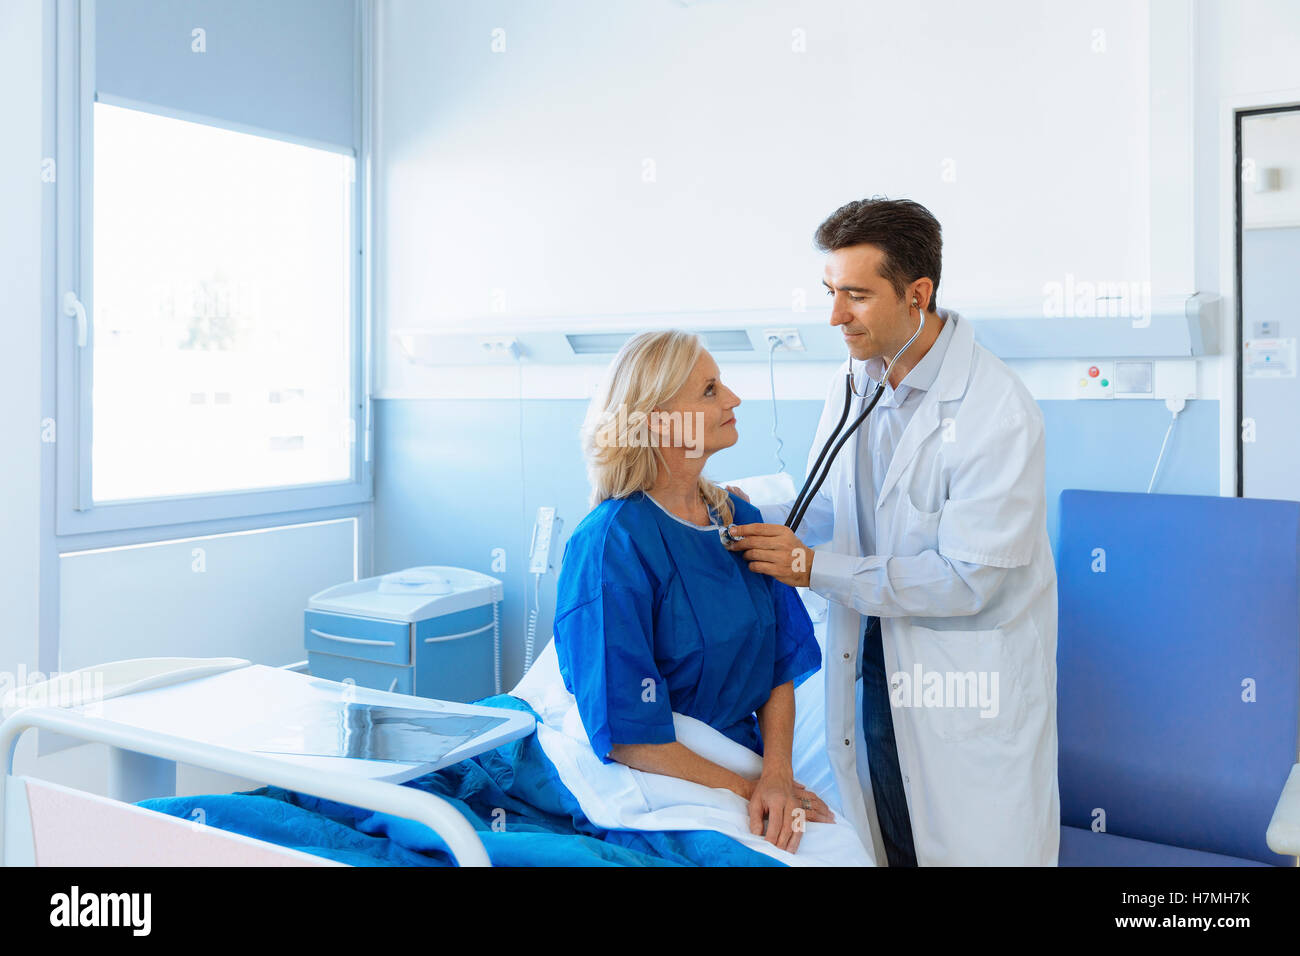 Doctor examining senior patient in hospital Banque D'Images